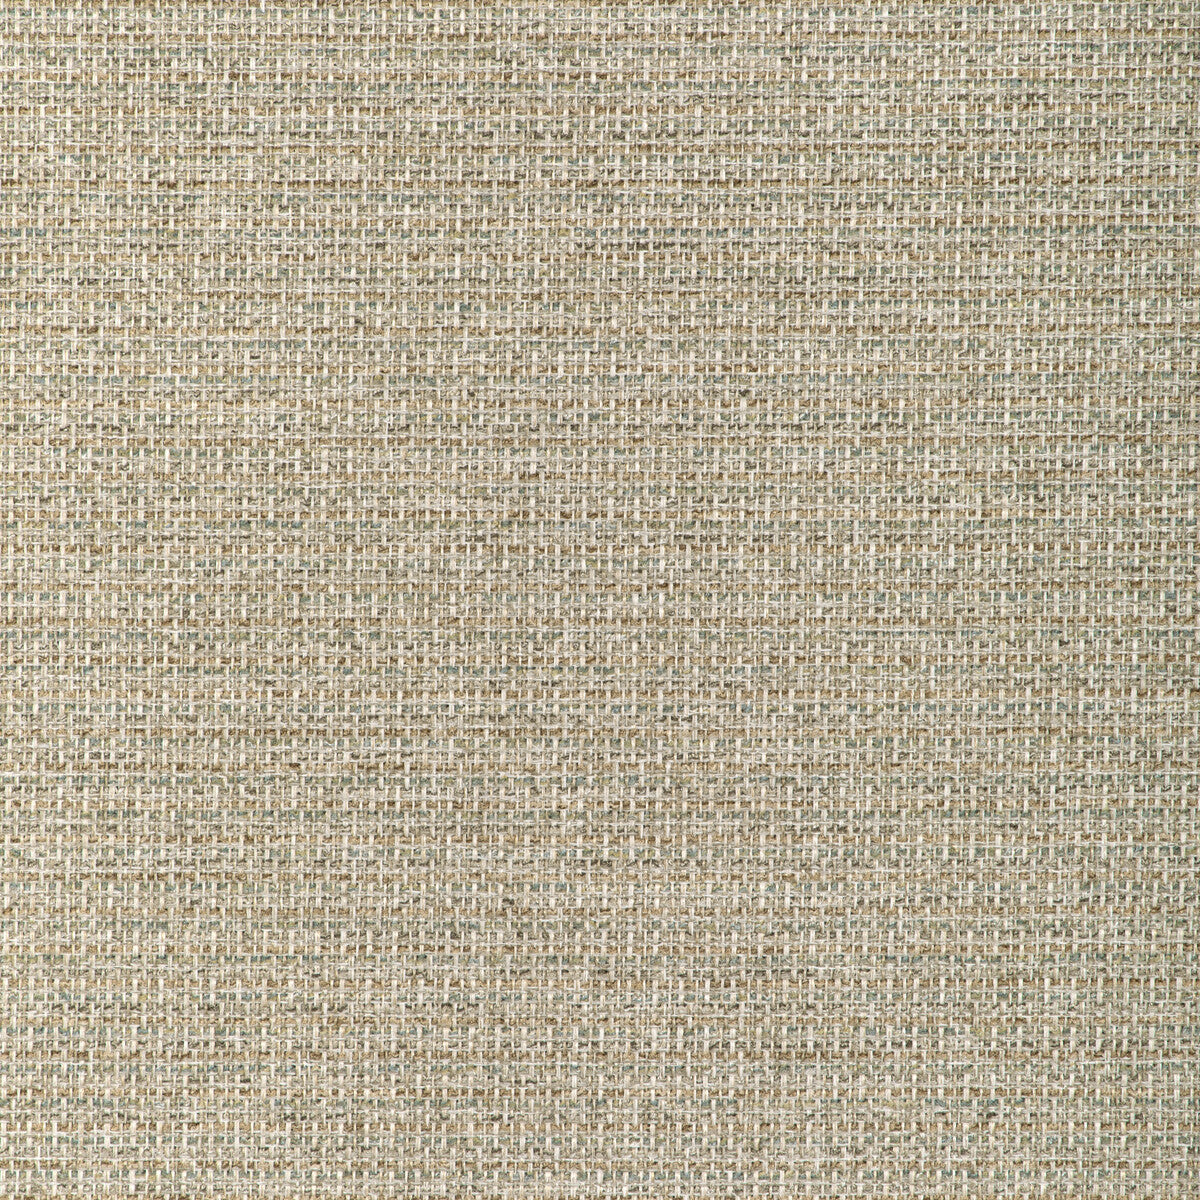 Kravet Design fabric in 37200-54 color - pattern 37200.54.0 - by Kravet Design in the Woven Colors collection